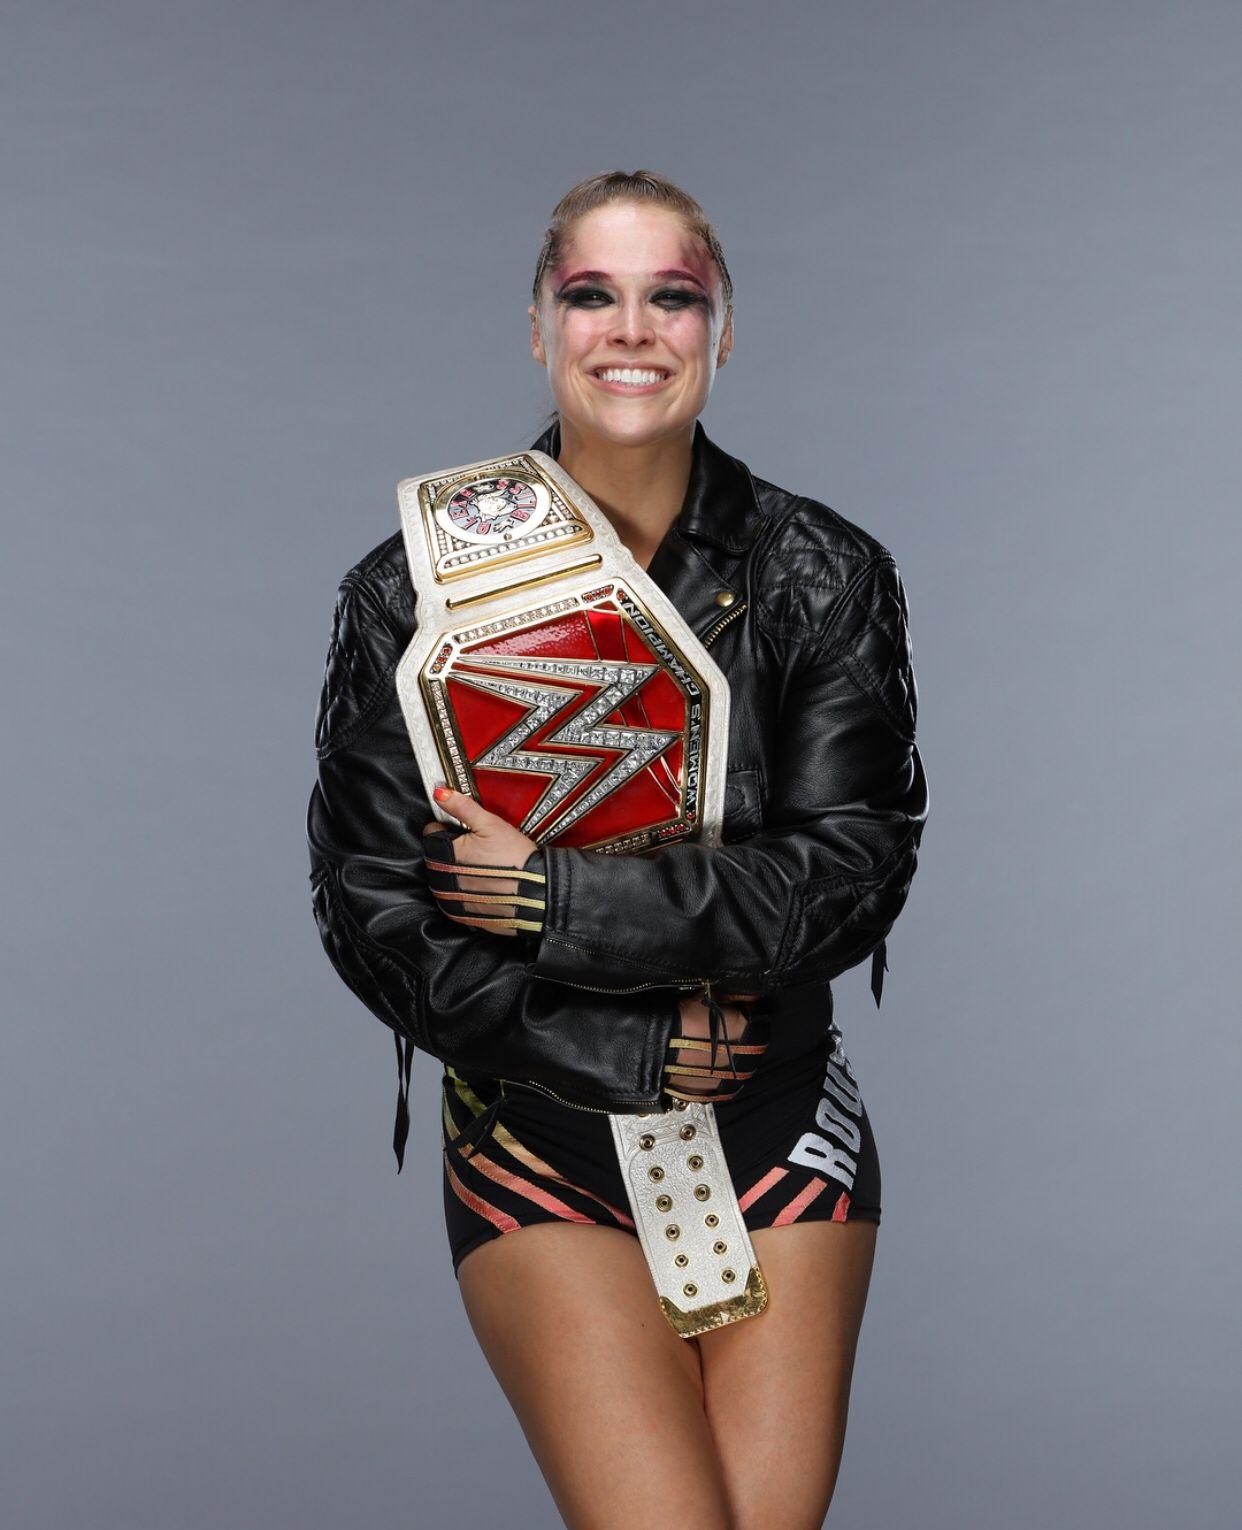 In my opinion Ronda is the best Raw Women's Champion. WWE